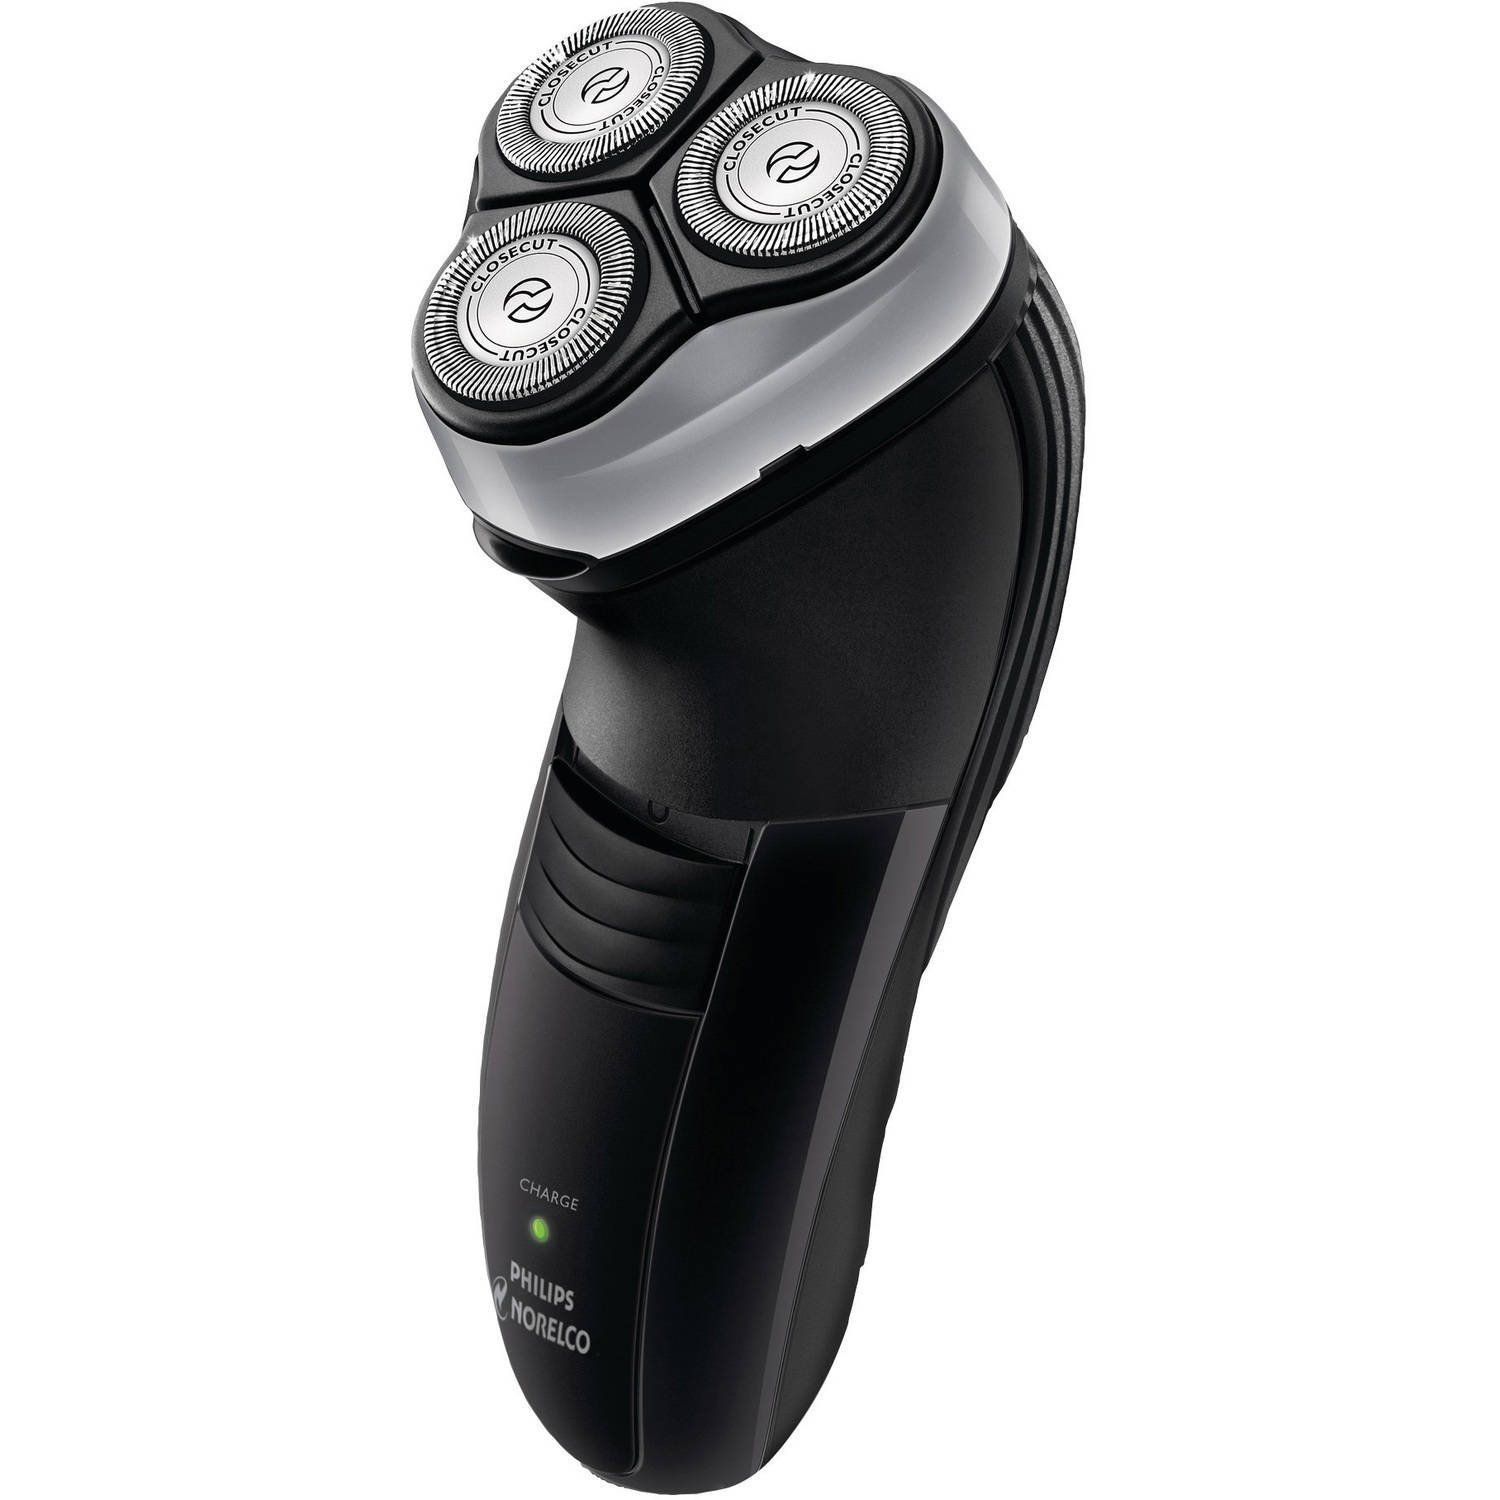 Philips Norelco Series 2000 Shaver, 1 ea - image 2 of 2